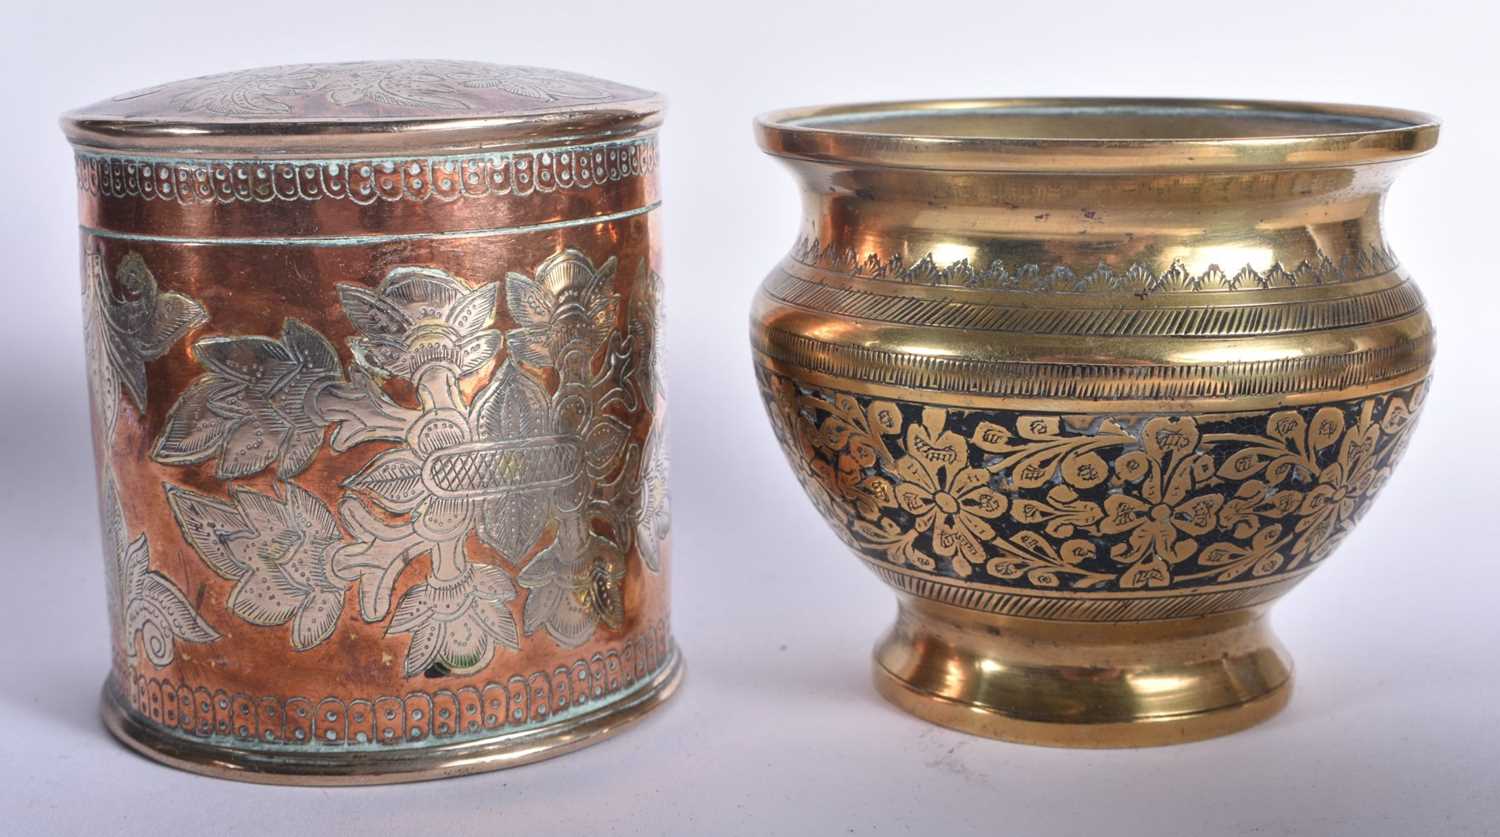 A COLLECTION OF ANTIQUE MIDDLE EASTERN BRONZE & METALWORK including a silver inlaid charger etc. - Image 2 of 8